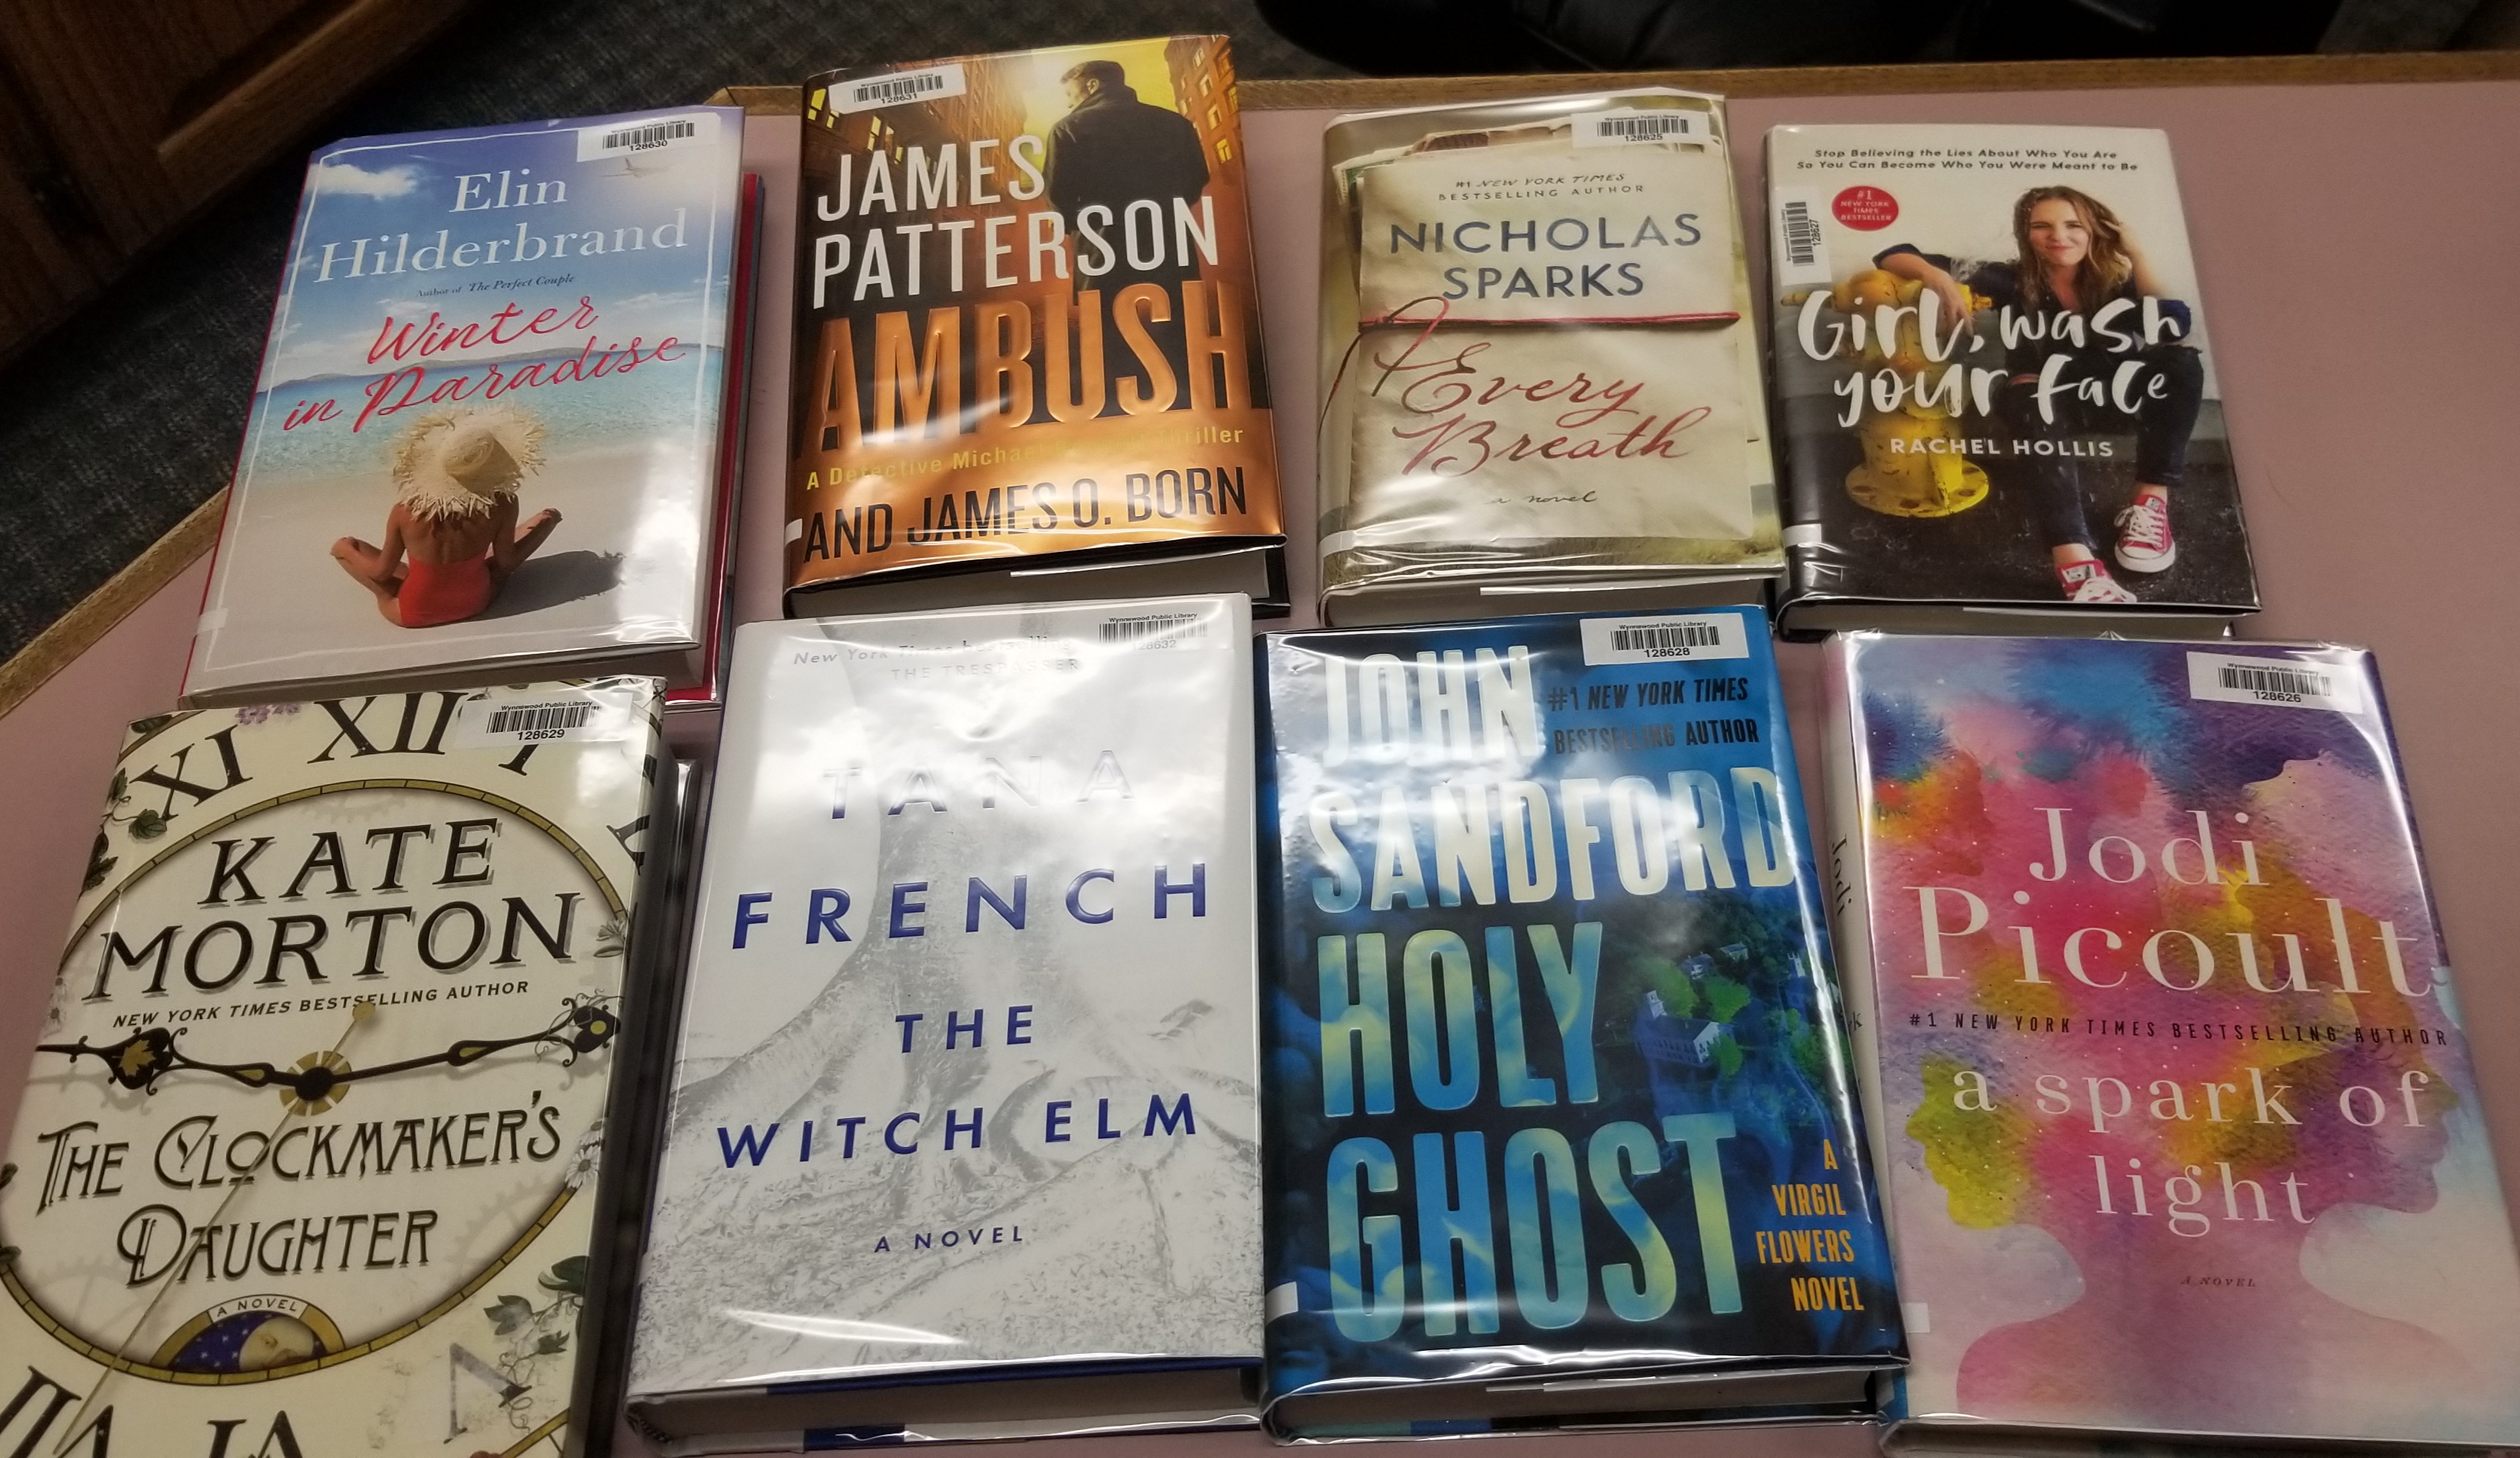 eight books on a table. Winter in paradise by Elin Hilderbrand. Ambush by James Patterson. Every Breath by Nicholas Sparks. Girl Wash Your Face by Rachel Hollis. The Clockmaker's Daughter by Kate Morton. The Witch Elm by Tana French. Holy Ghost by John Sandford. A Spark of Light by Jodi Picoult.